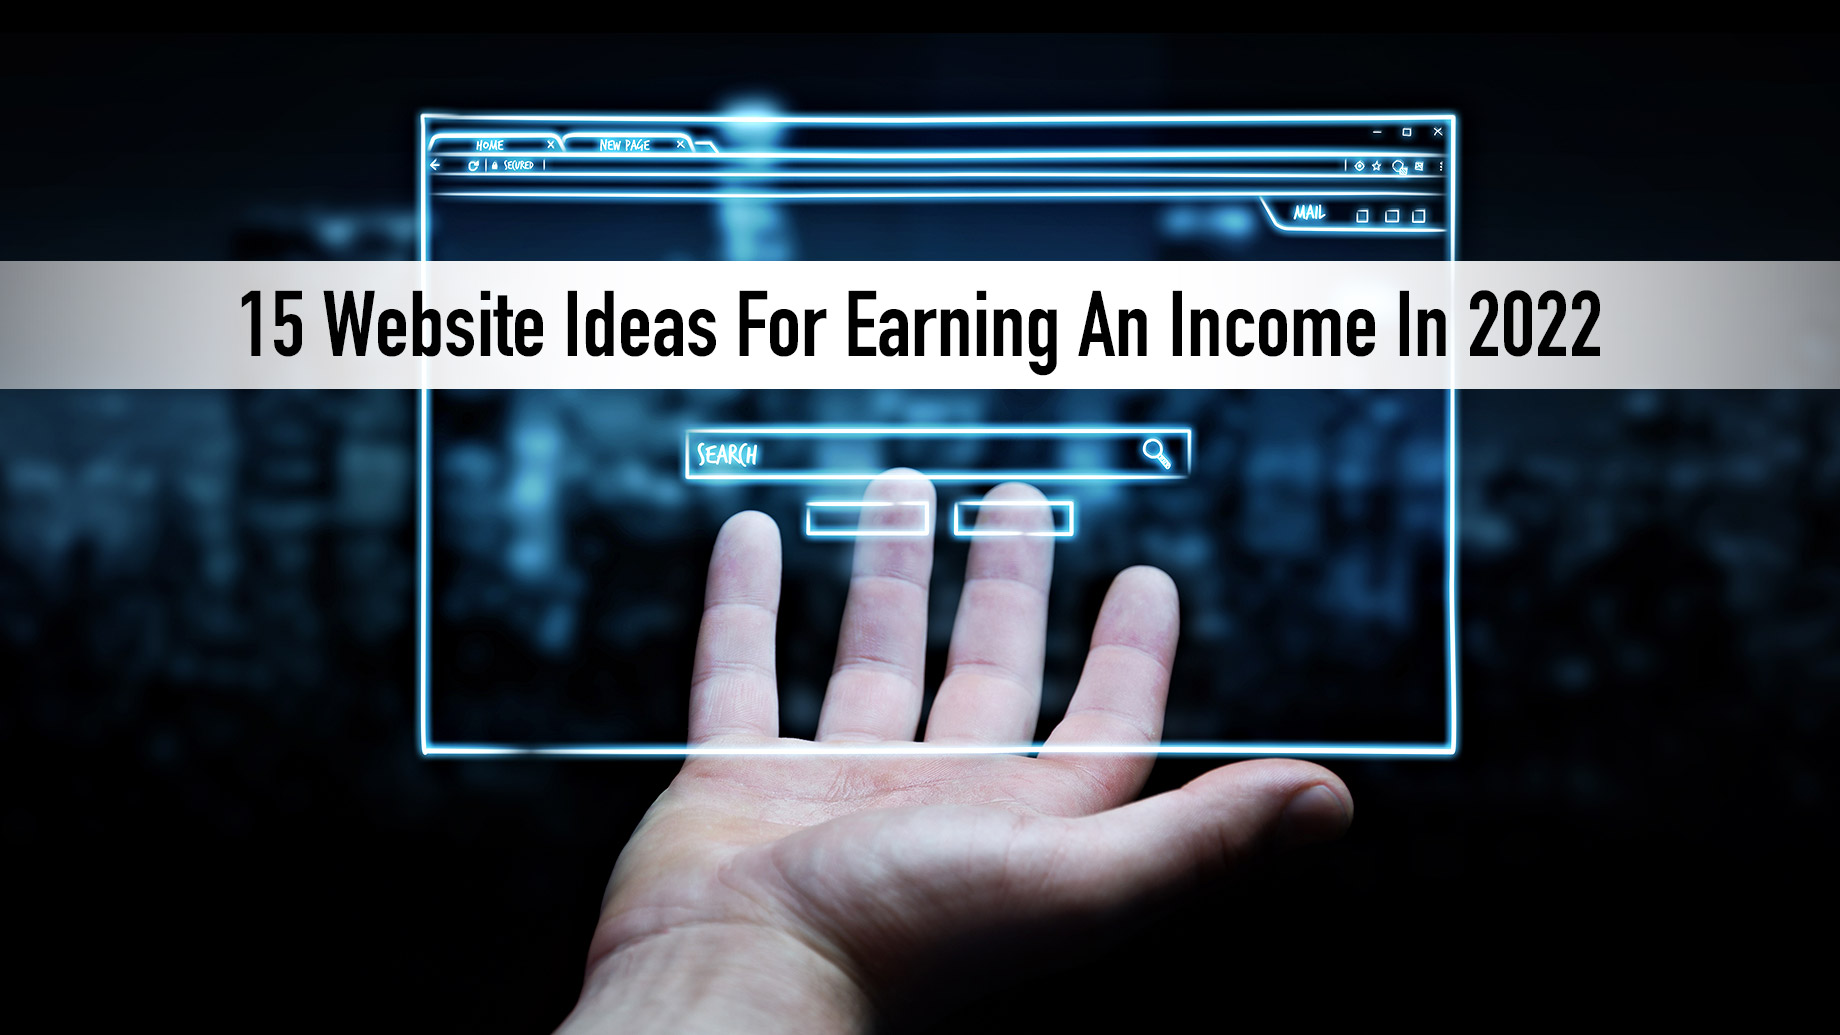 15 Website Ideas For Earning An Income In 2022